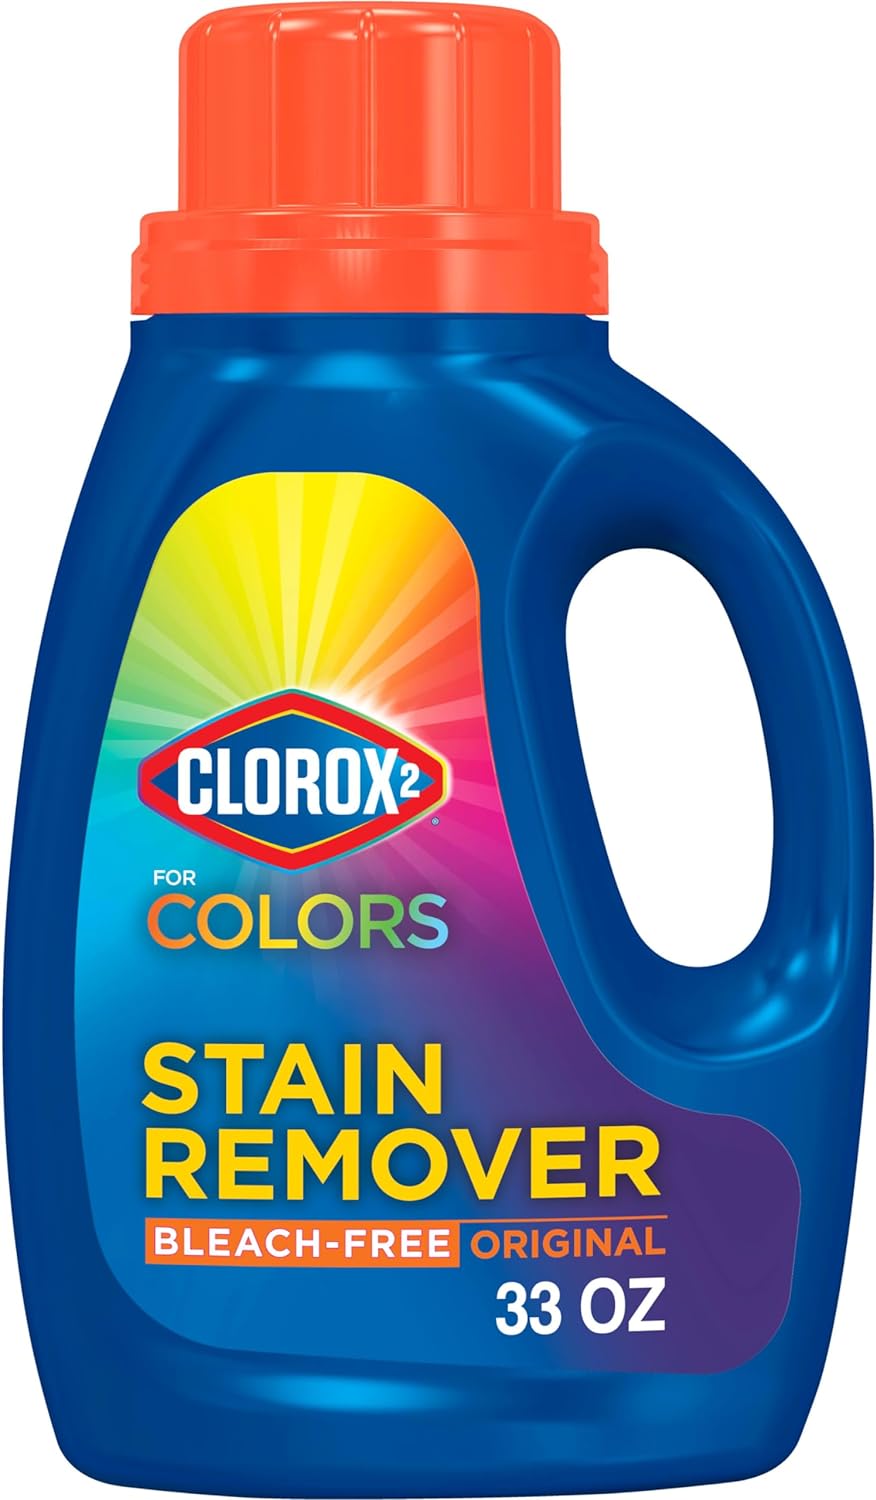 Clorox 2 for Colors Stain Remover and Laundry Additive, Original, 33 Fluid Ounces (Pack May Vary)